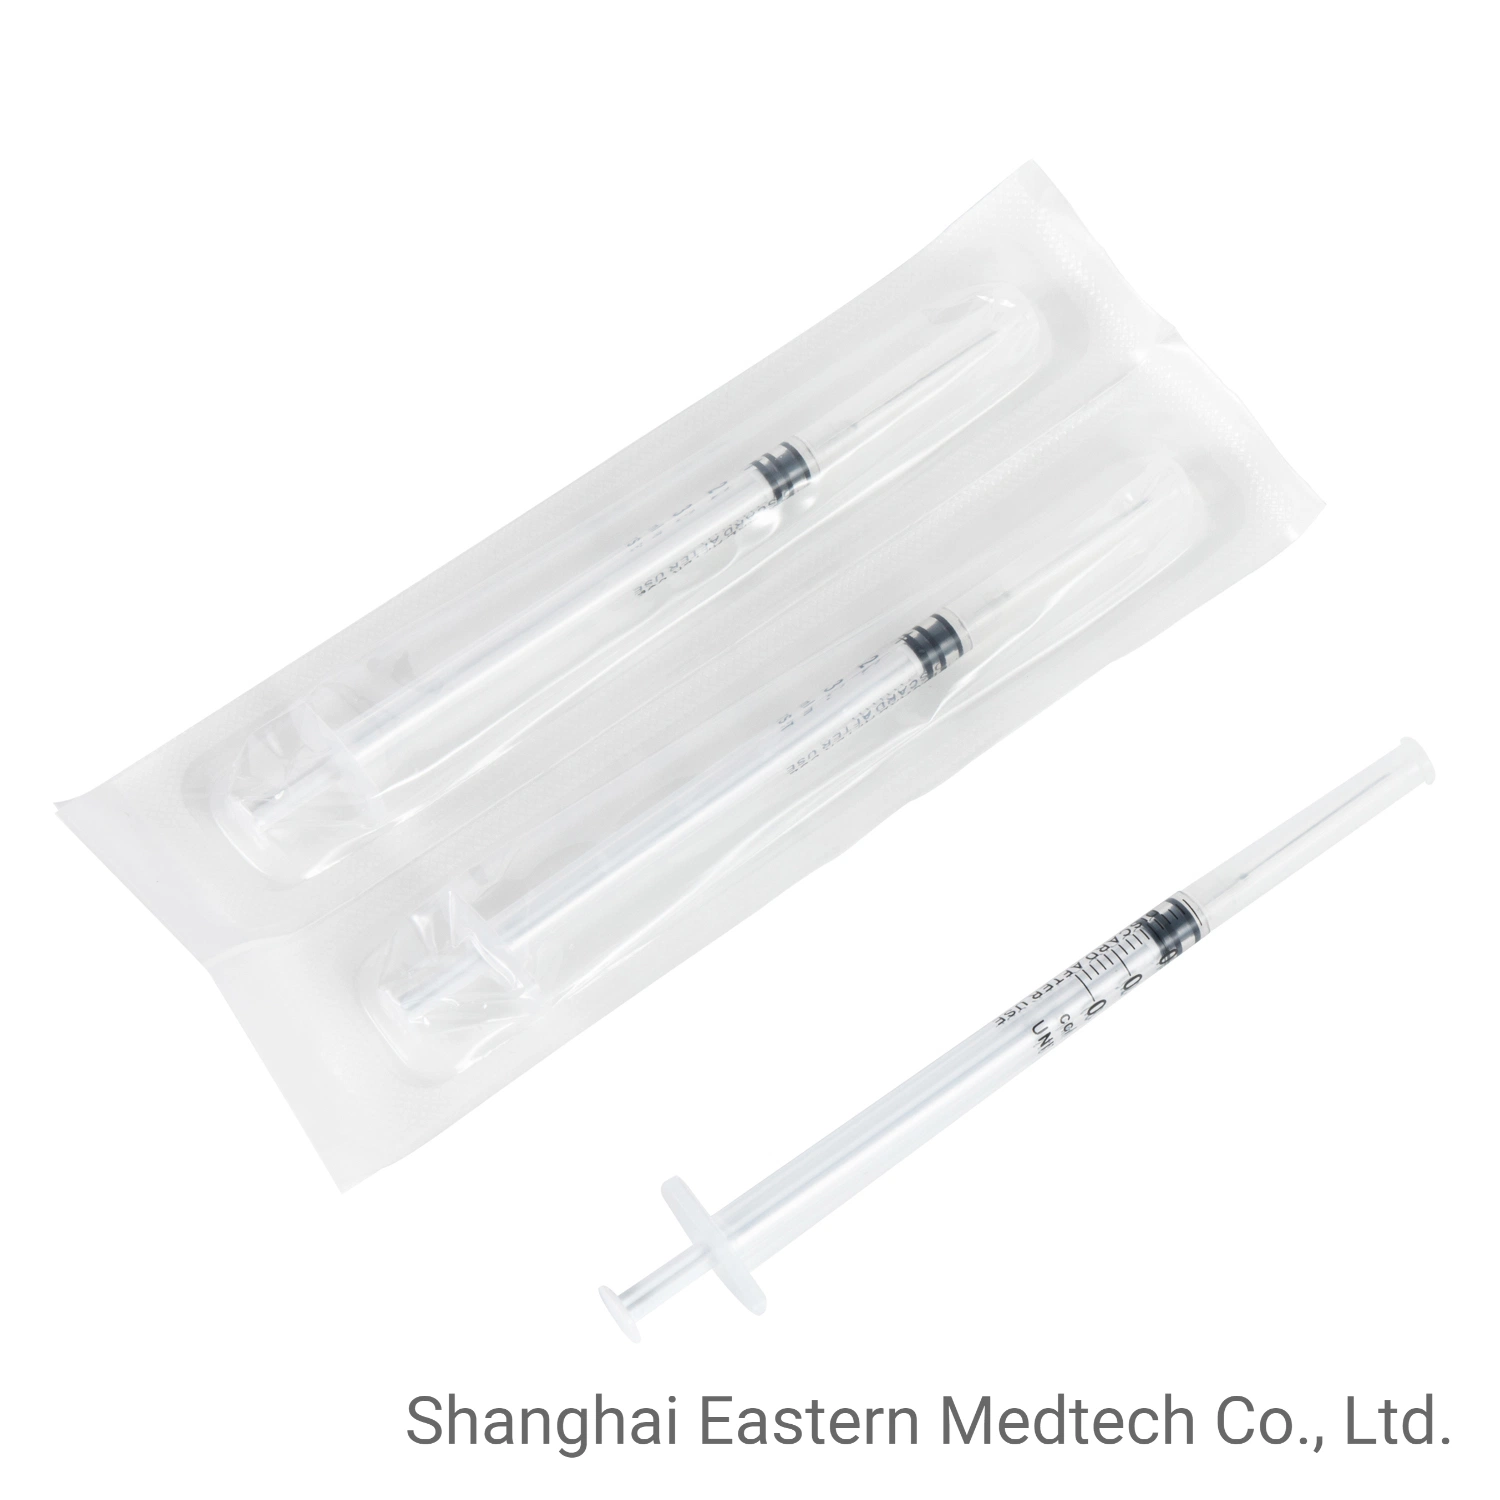 Hospital Equipment Disposable Medical Products, Latex Free, for Single Use, CE Marked Fixed Needle 1ml, Vaccine Syringe